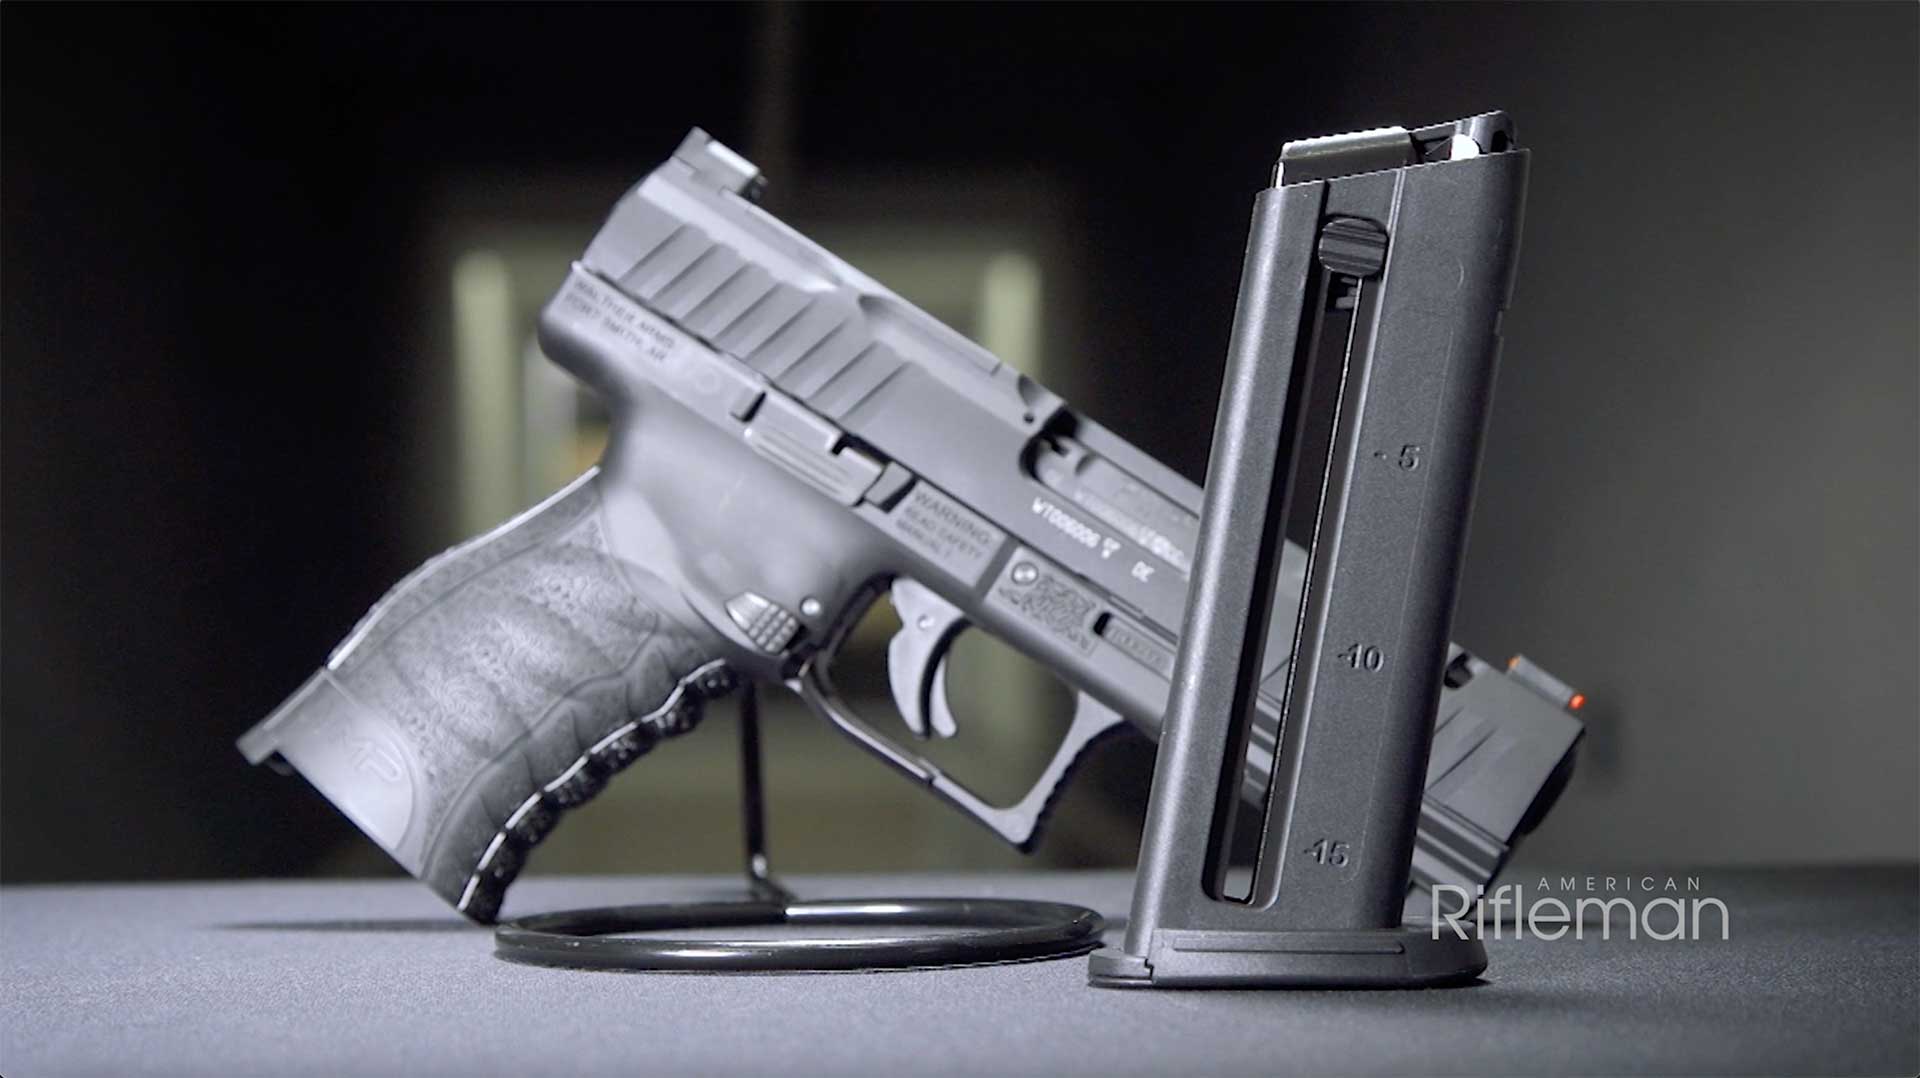 The Walther WMP's magazine standing on a table, with the WMP pistol in the background.